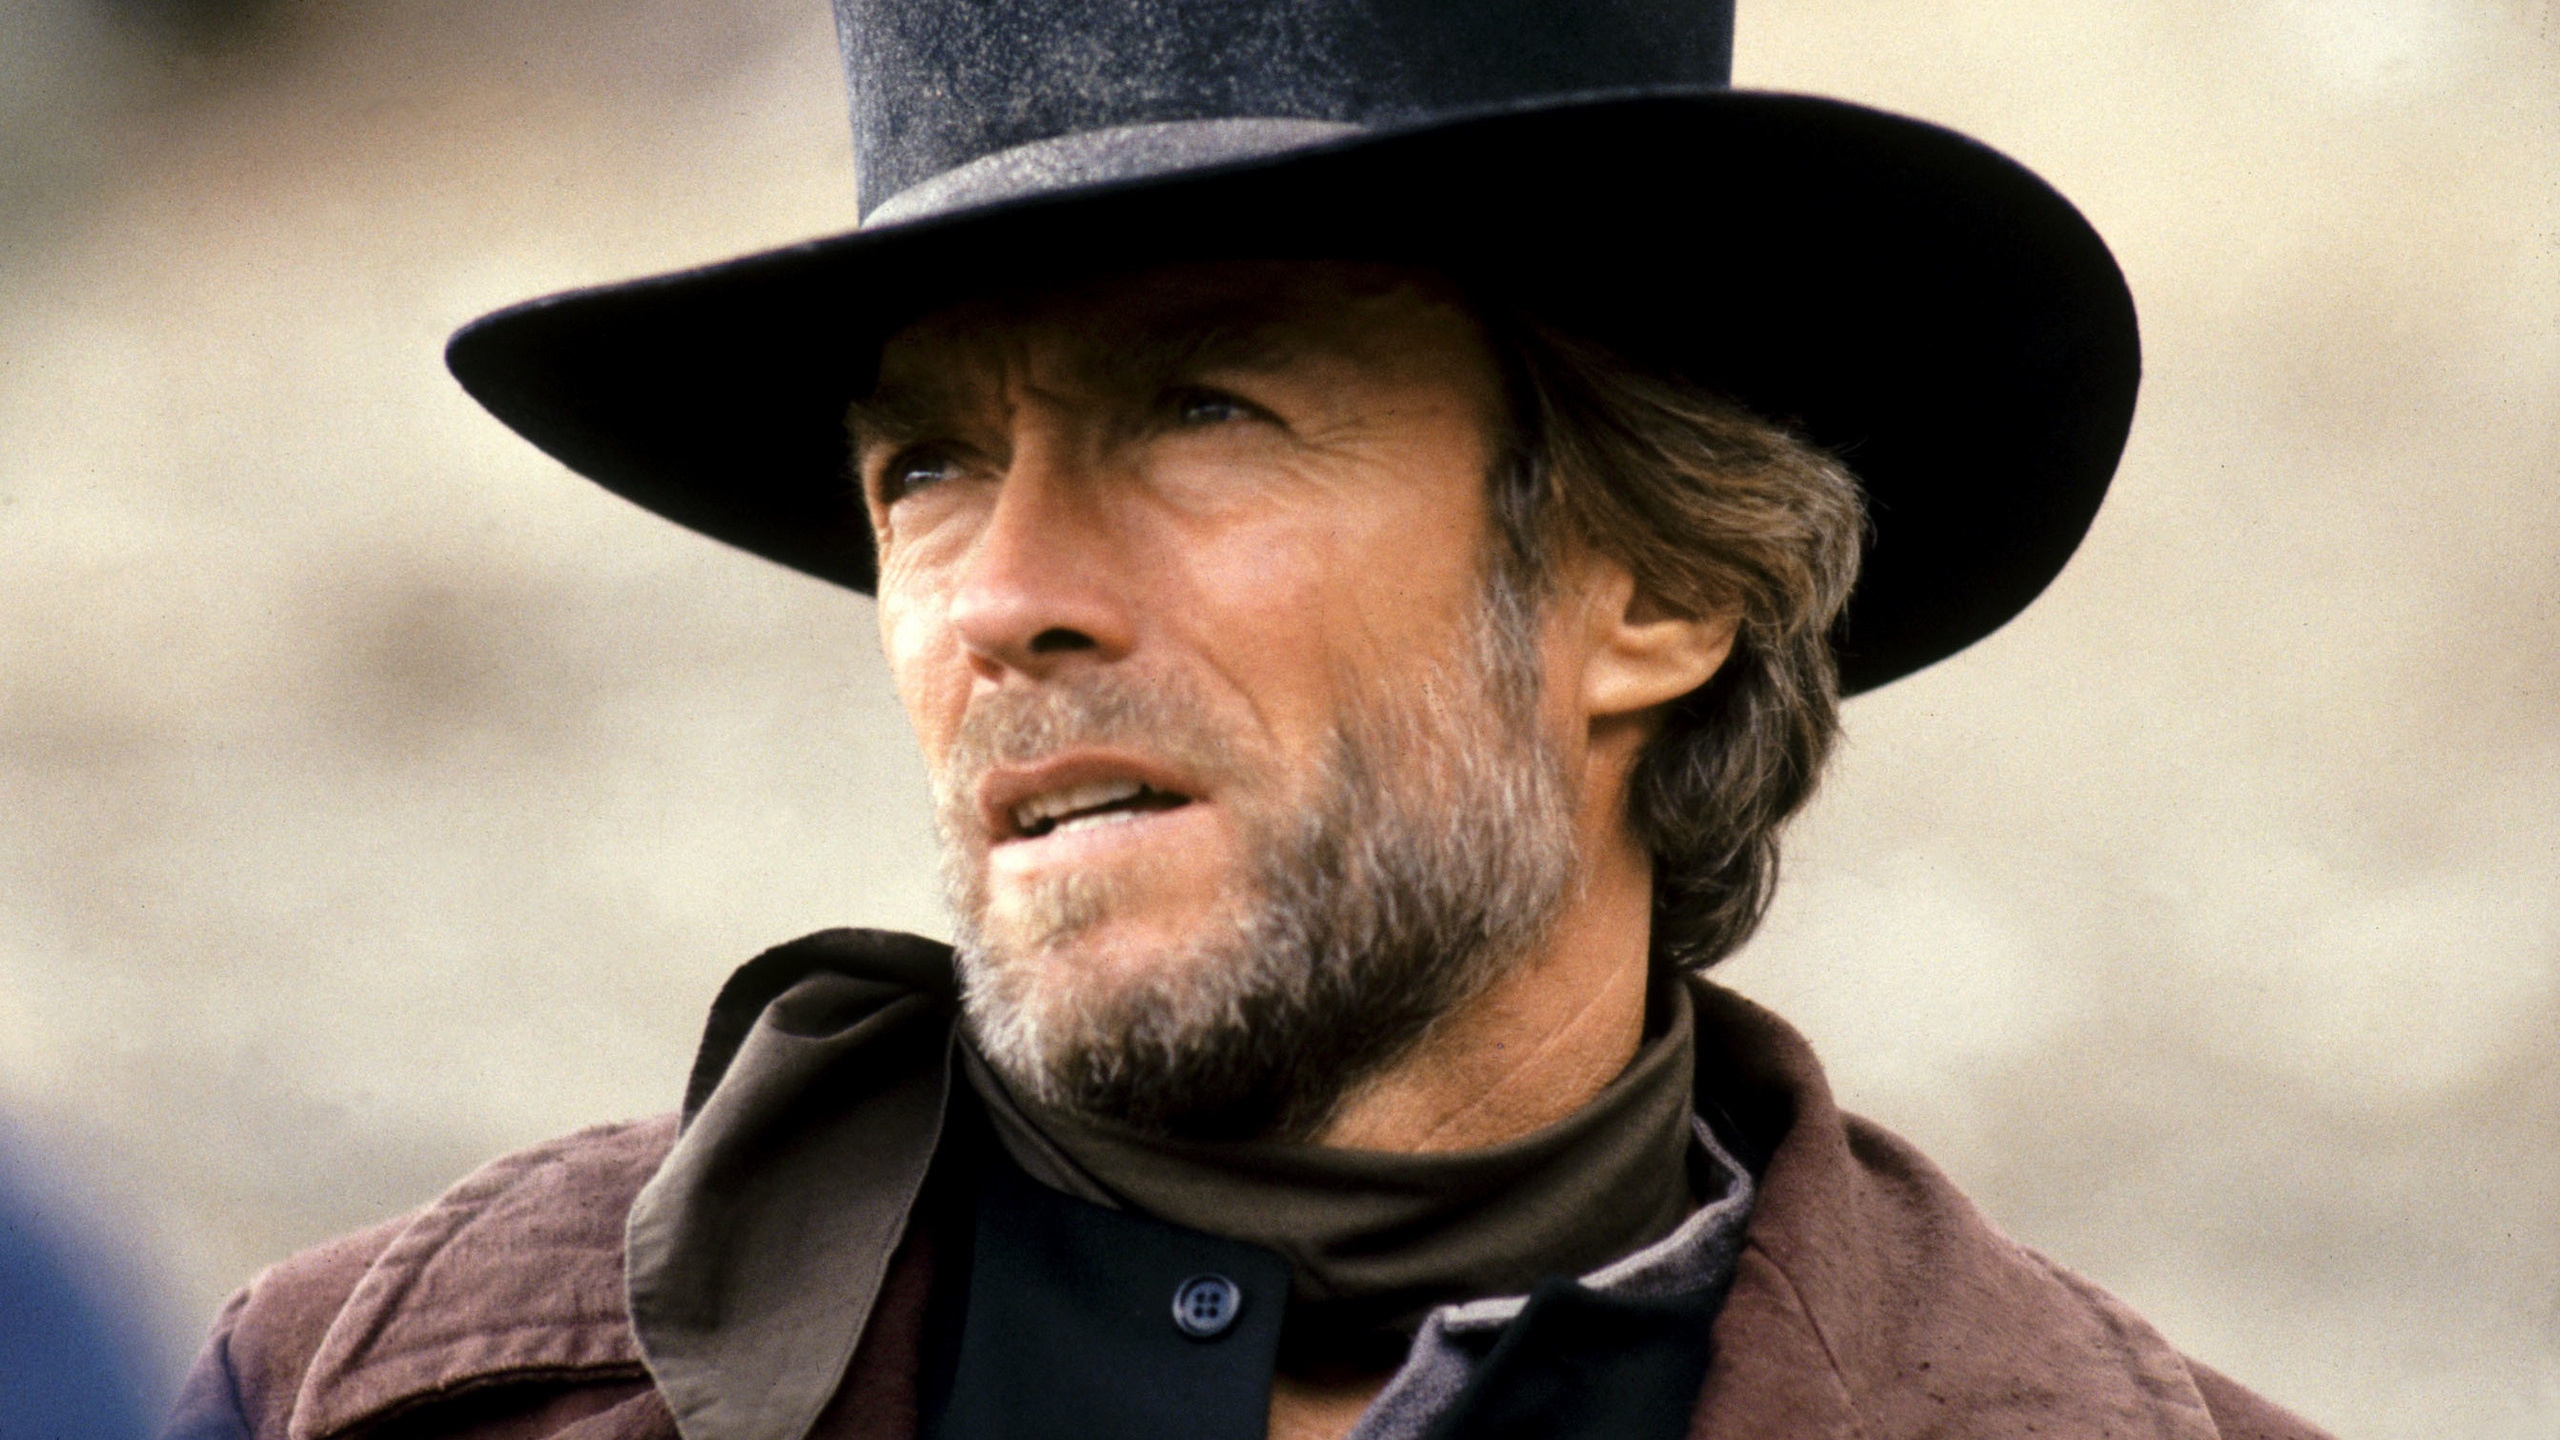 Clint Eastwood Vintage for 2560x1440 HDTV resolution